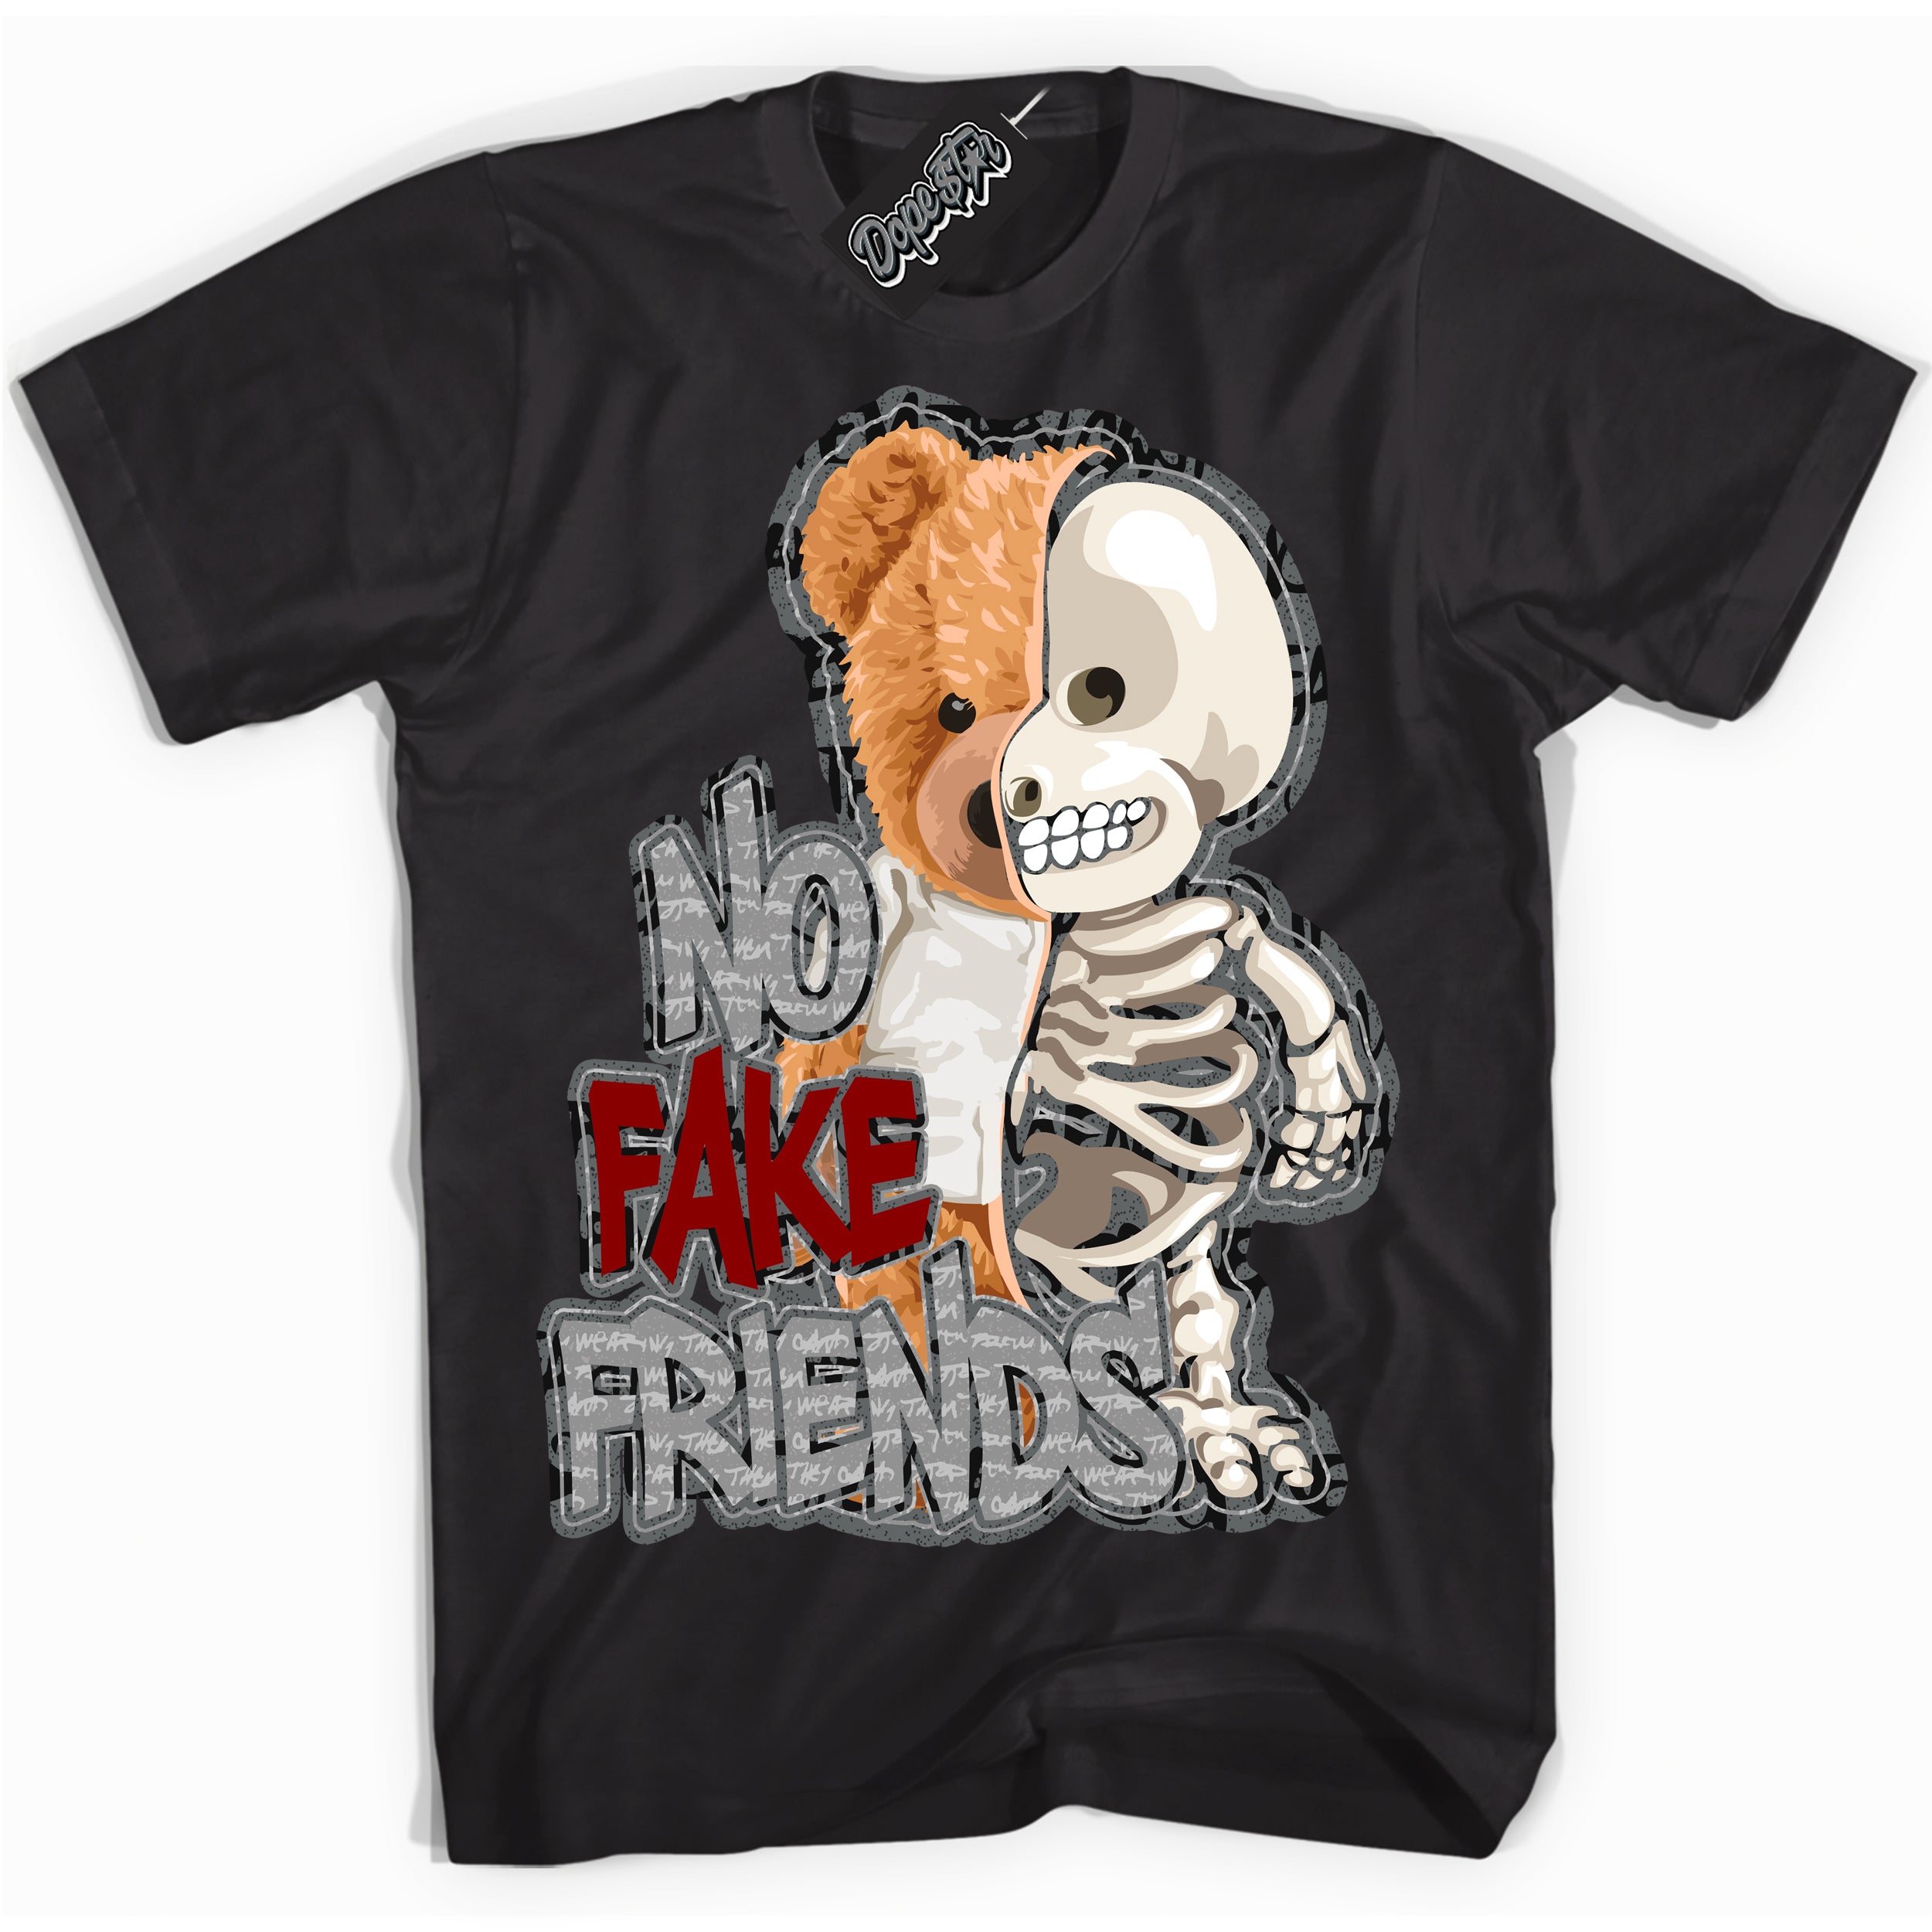 Cool Black Shirt with “ No Fake Friends ” design that perfectly matches Rebellionaire 1s Sneakers.